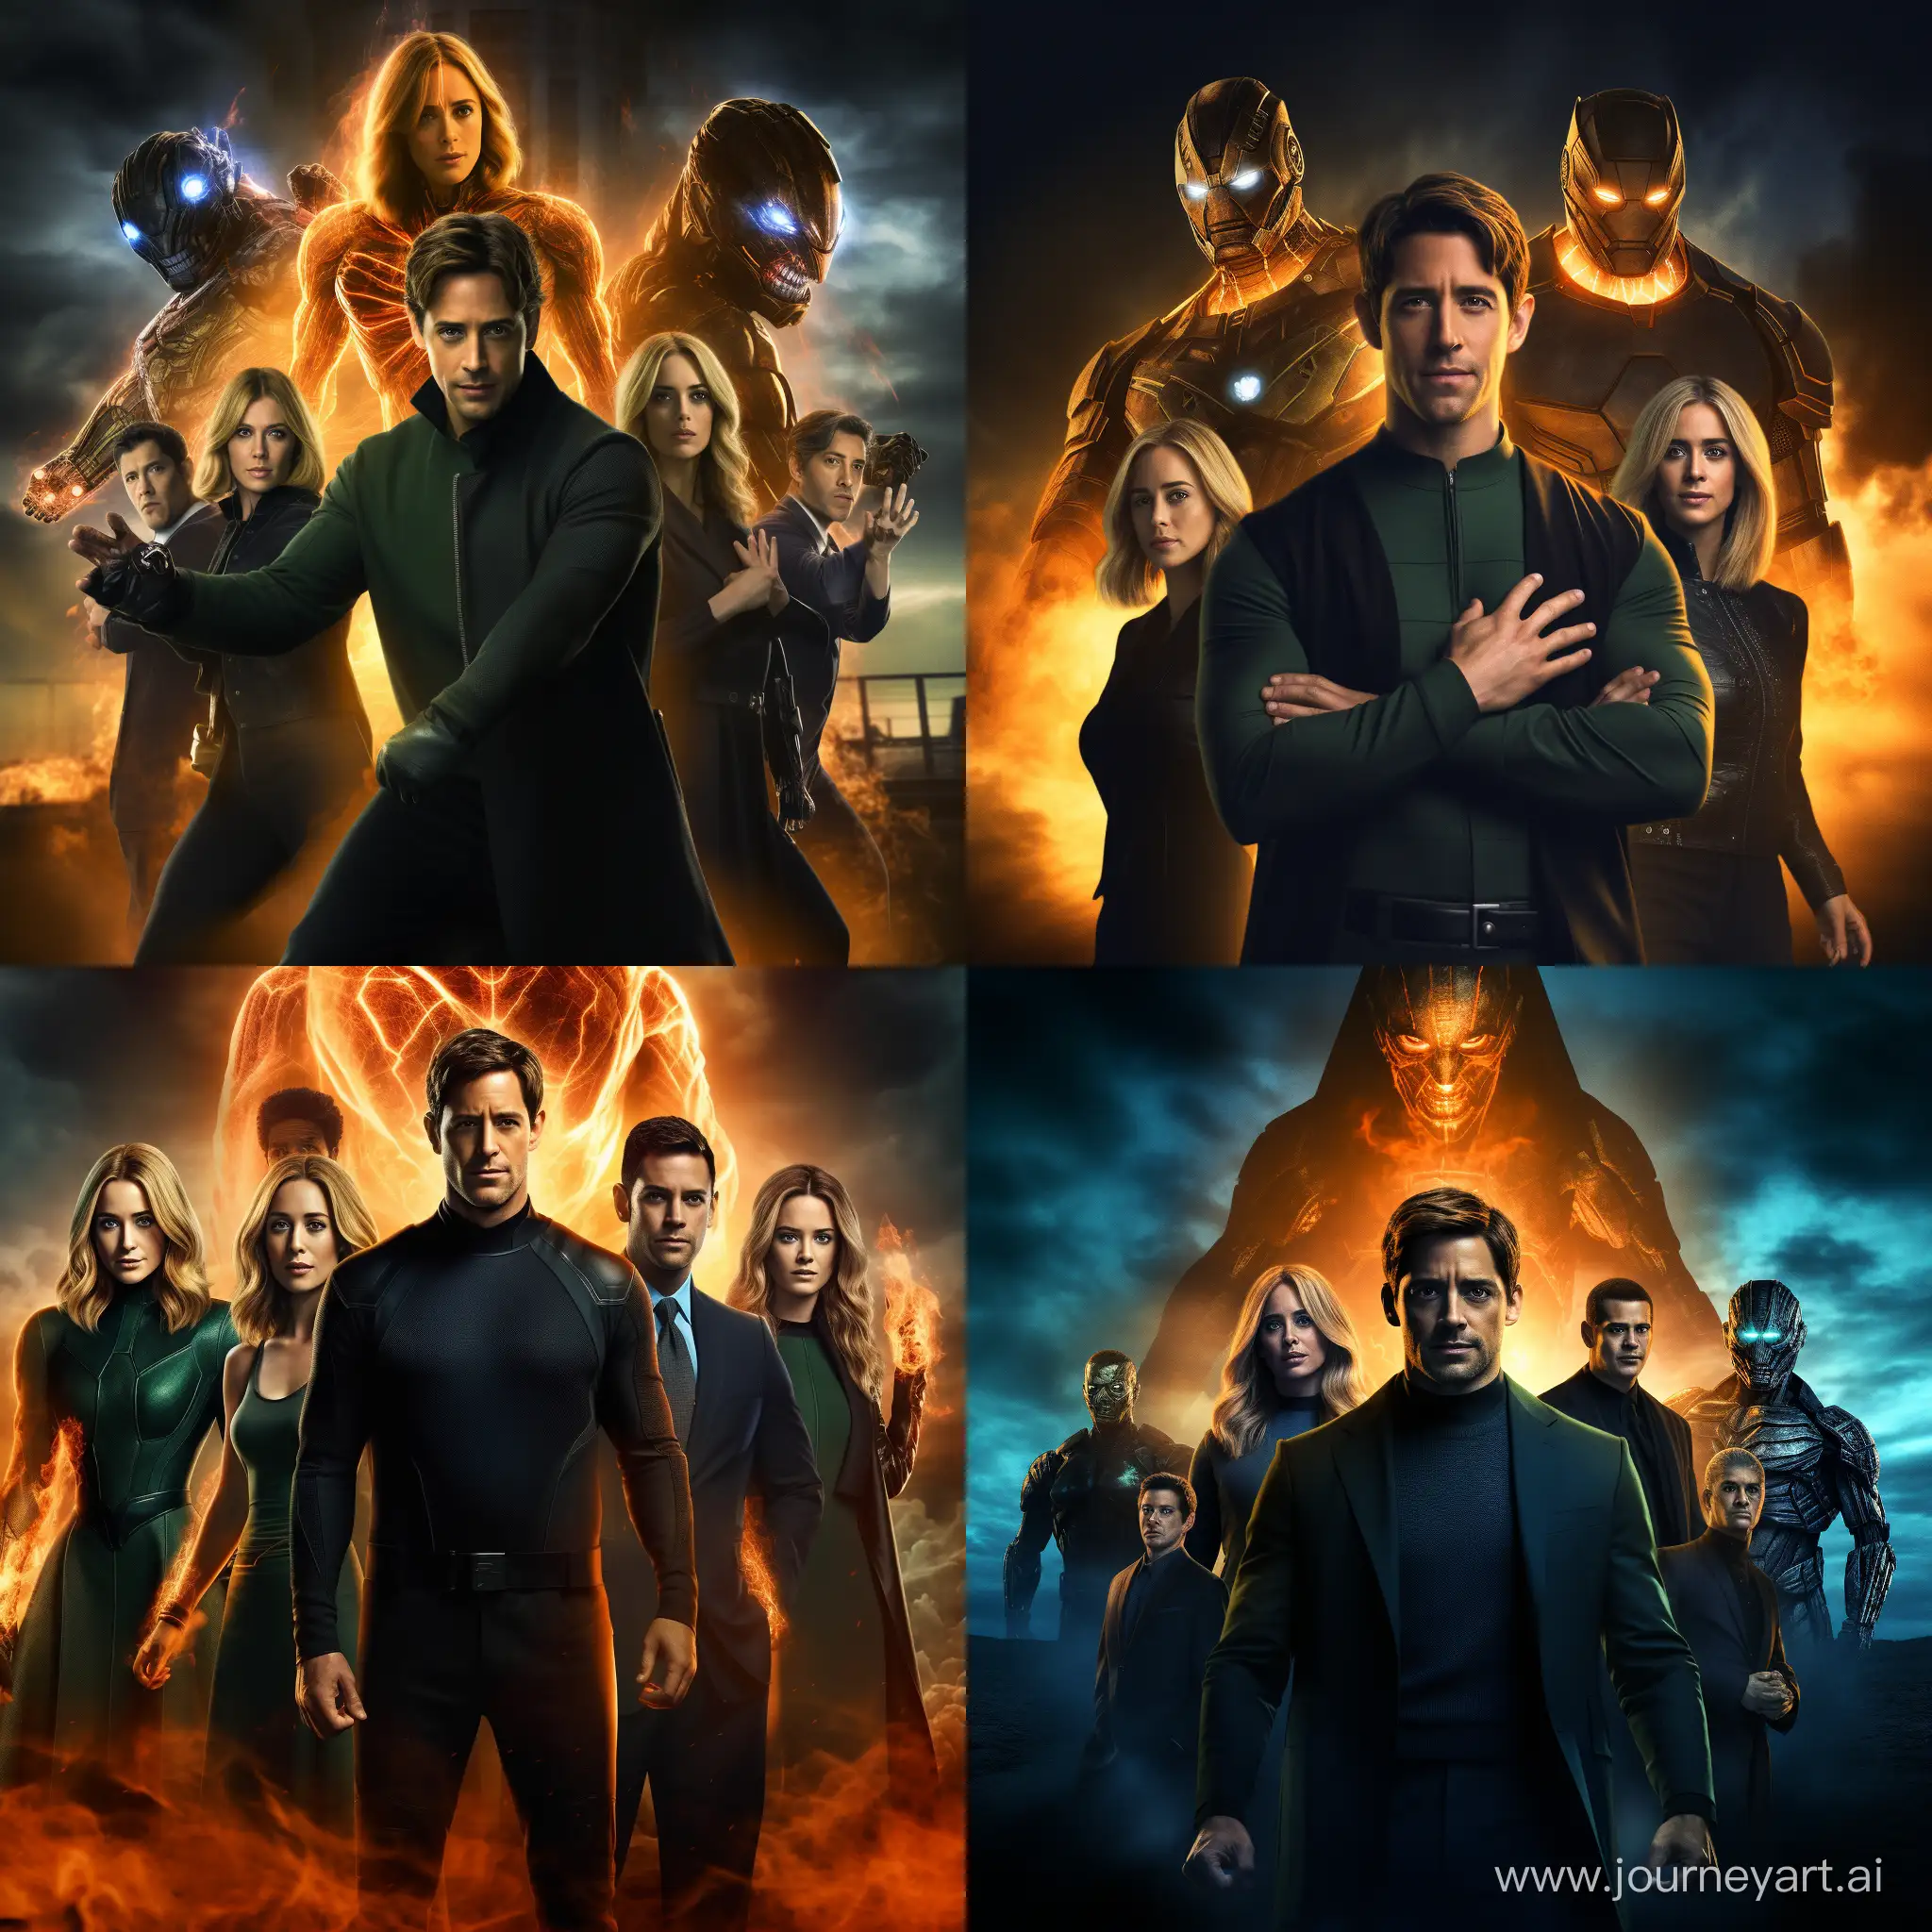 John Krasinski as Mr. Fantastic, Emily Blunt as The Invisible Woman, Ross Lynch as Human Torch, Eric Allan Kramer as The Thing, and Mark Fischbach as Doctor Doom.